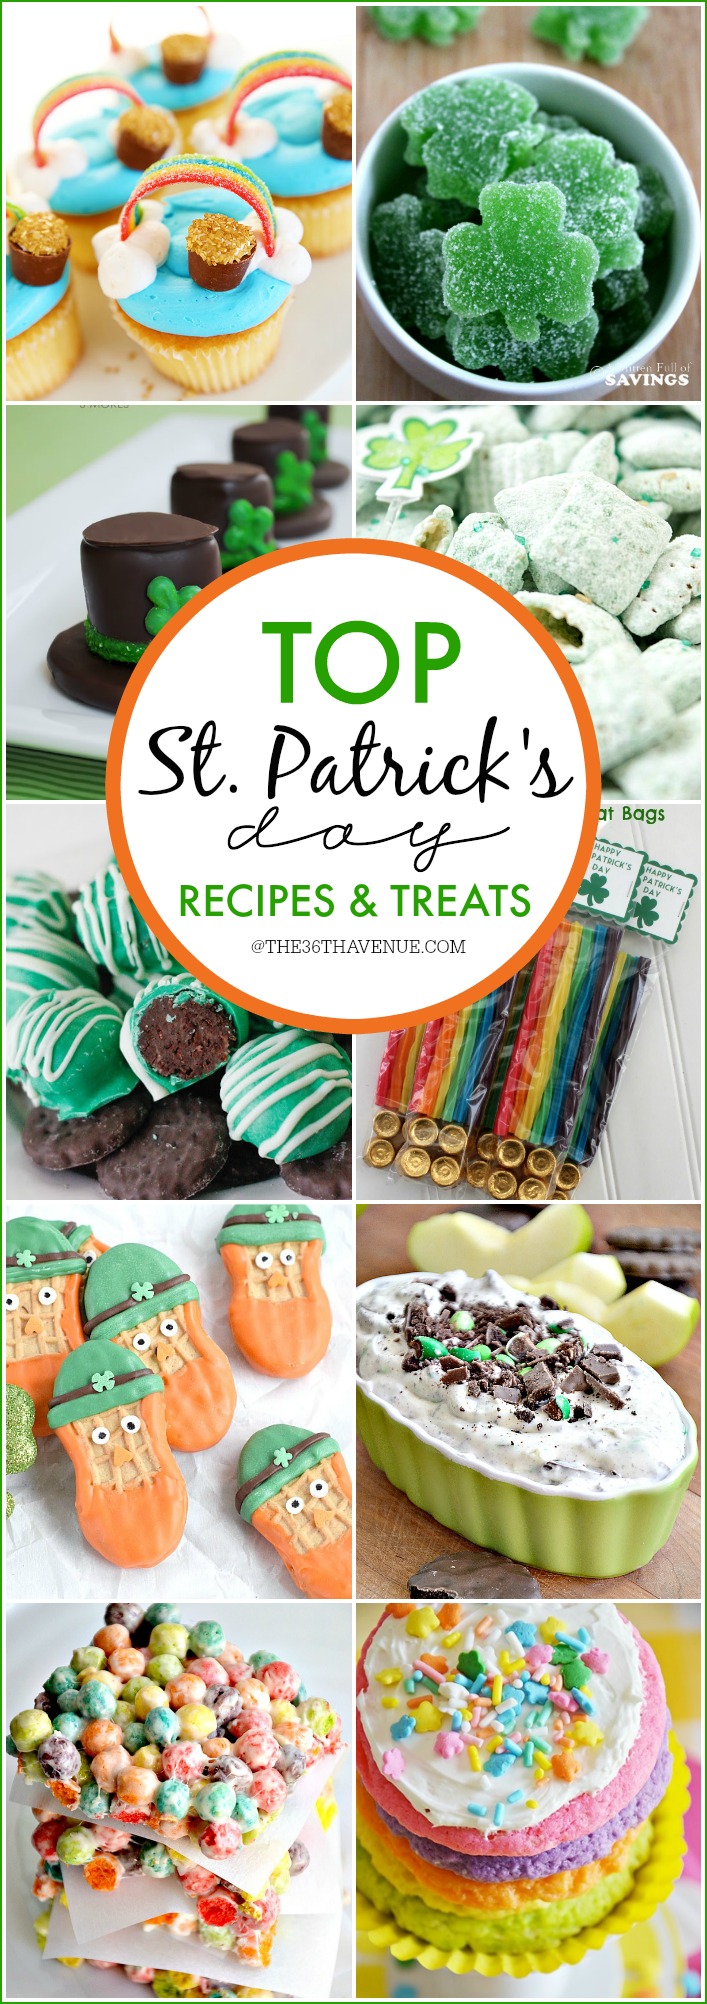 St. Patrick's Day Recipes and Treats - These festive ideas are the cutest recipes ever! PIN IT NOW and make them later!